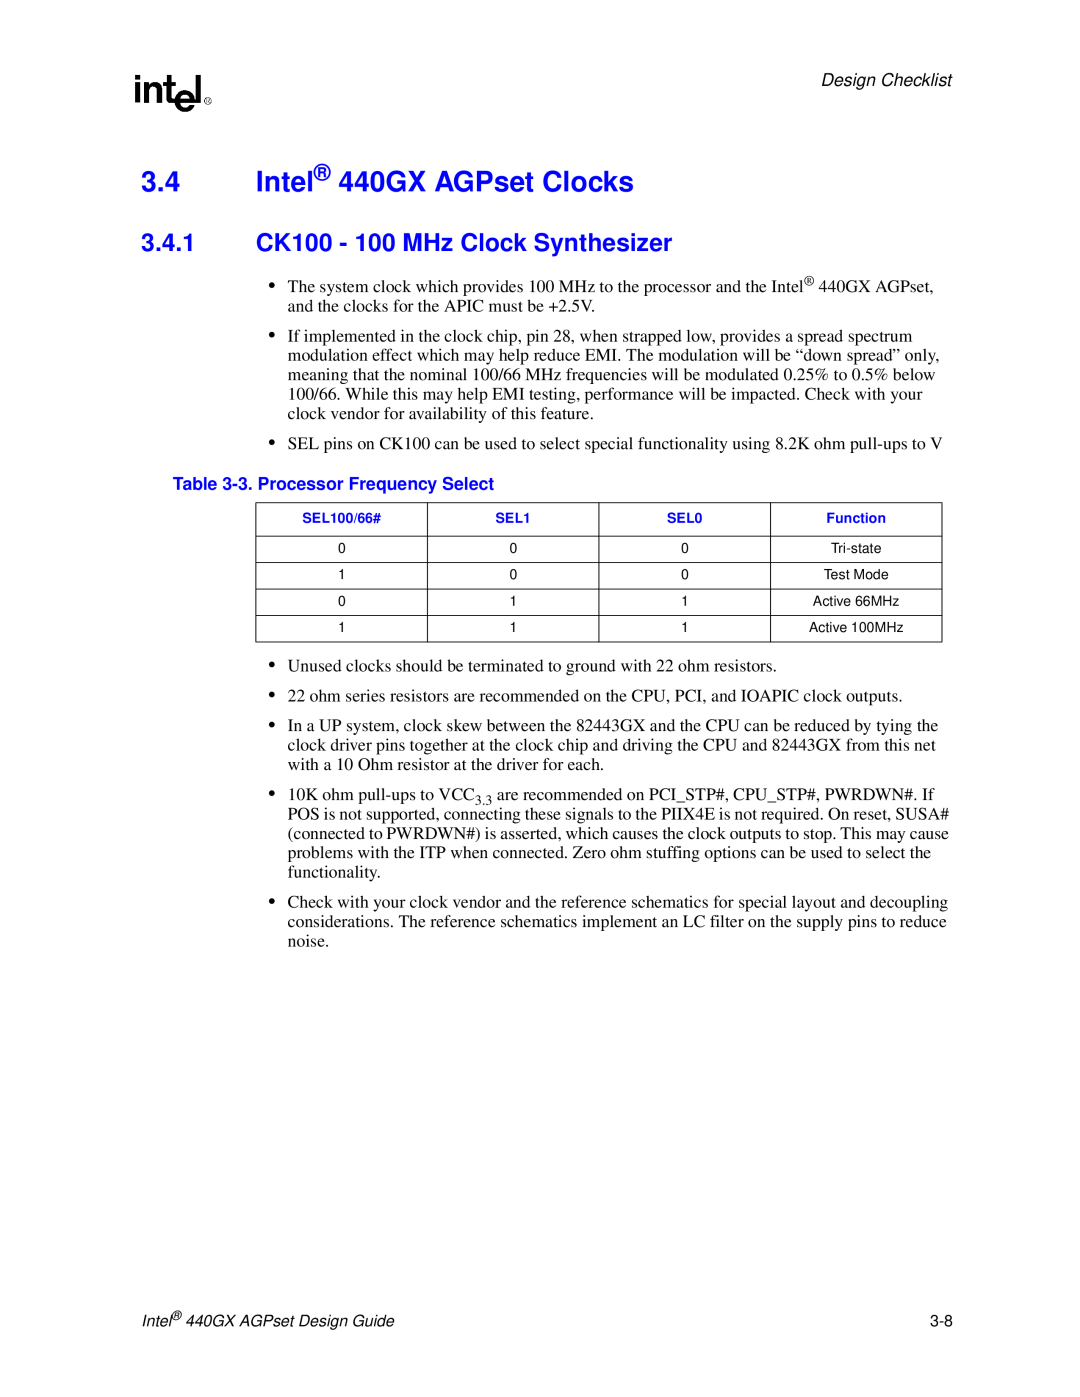 Intel manual Intel 440GX AGPset Clocks, 3.4.1 CK100 - 100 MHz Clock Synthesizer, 3. Processor Frequency Select 